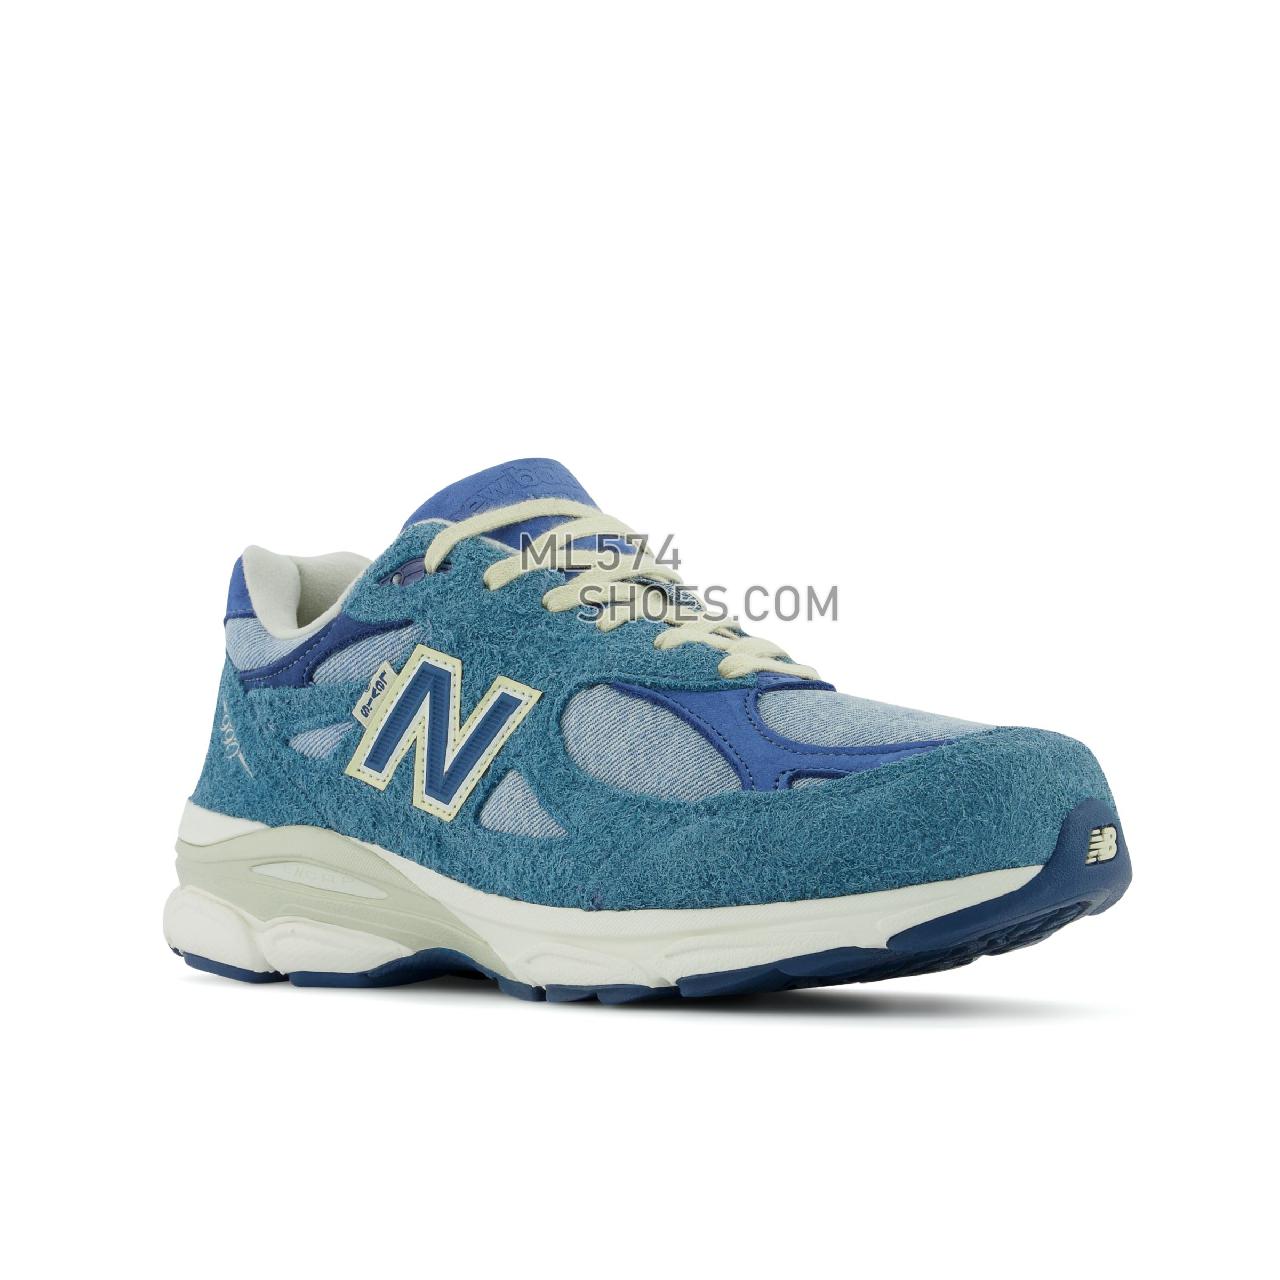 New Balance Made in USA 990v3 Levis - Unisex Men's Women's Made in USA And UK Sneakers - Mallard Blue with Dark Blue - M990LI3